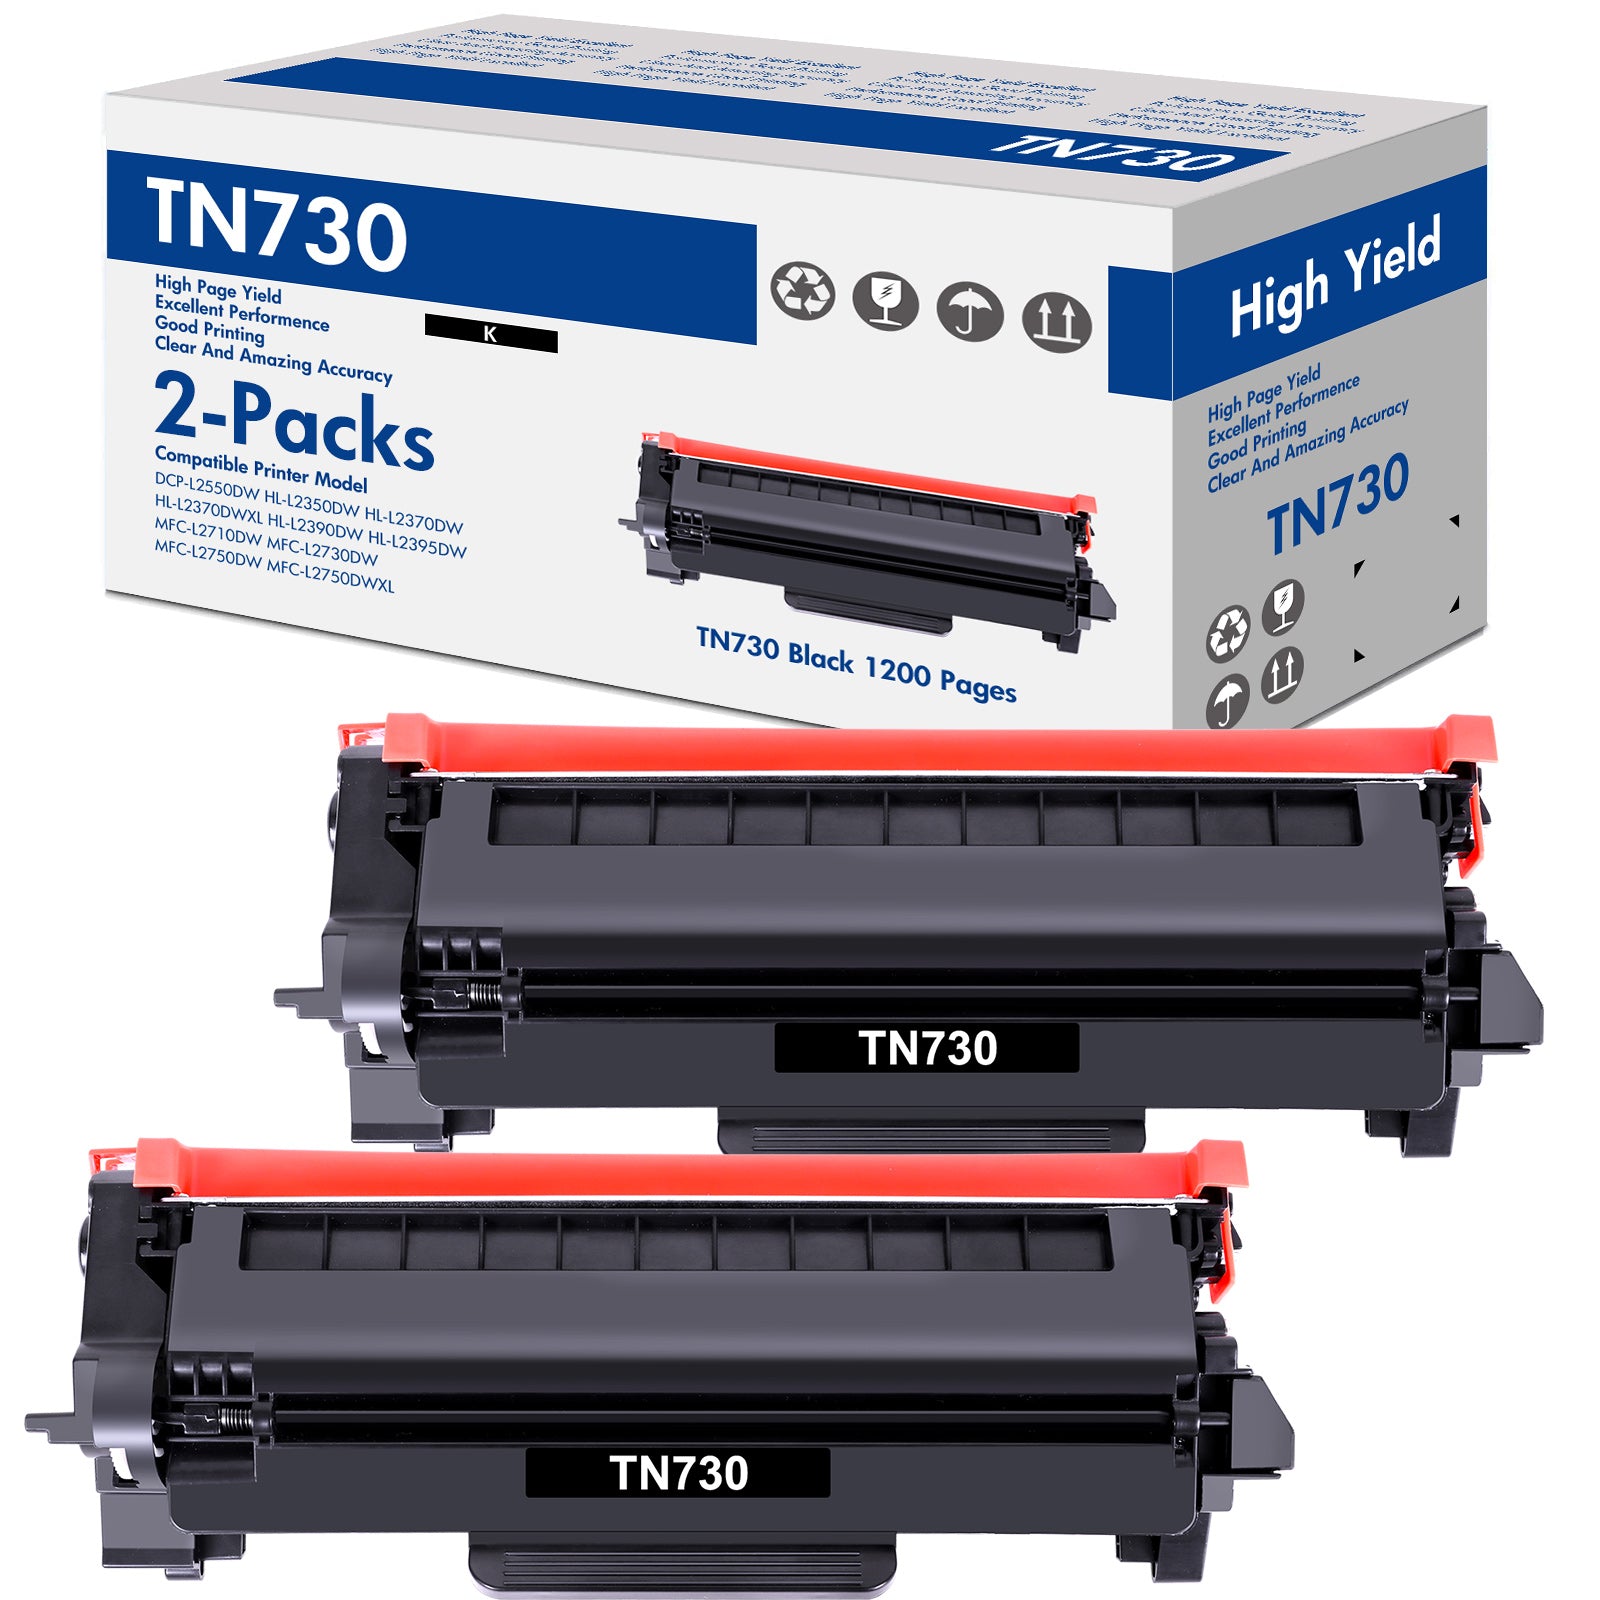 TN730 Toner Cartridge Replacement Compatible for Brother TN-730 TN730 TN-760 High Yield Compatible with DCP-L2550DW HL-L2350DW HL-L2370DW HL-L2395DW HL-L2370DWXL MFC-L2710DW (Black, 2Pack)